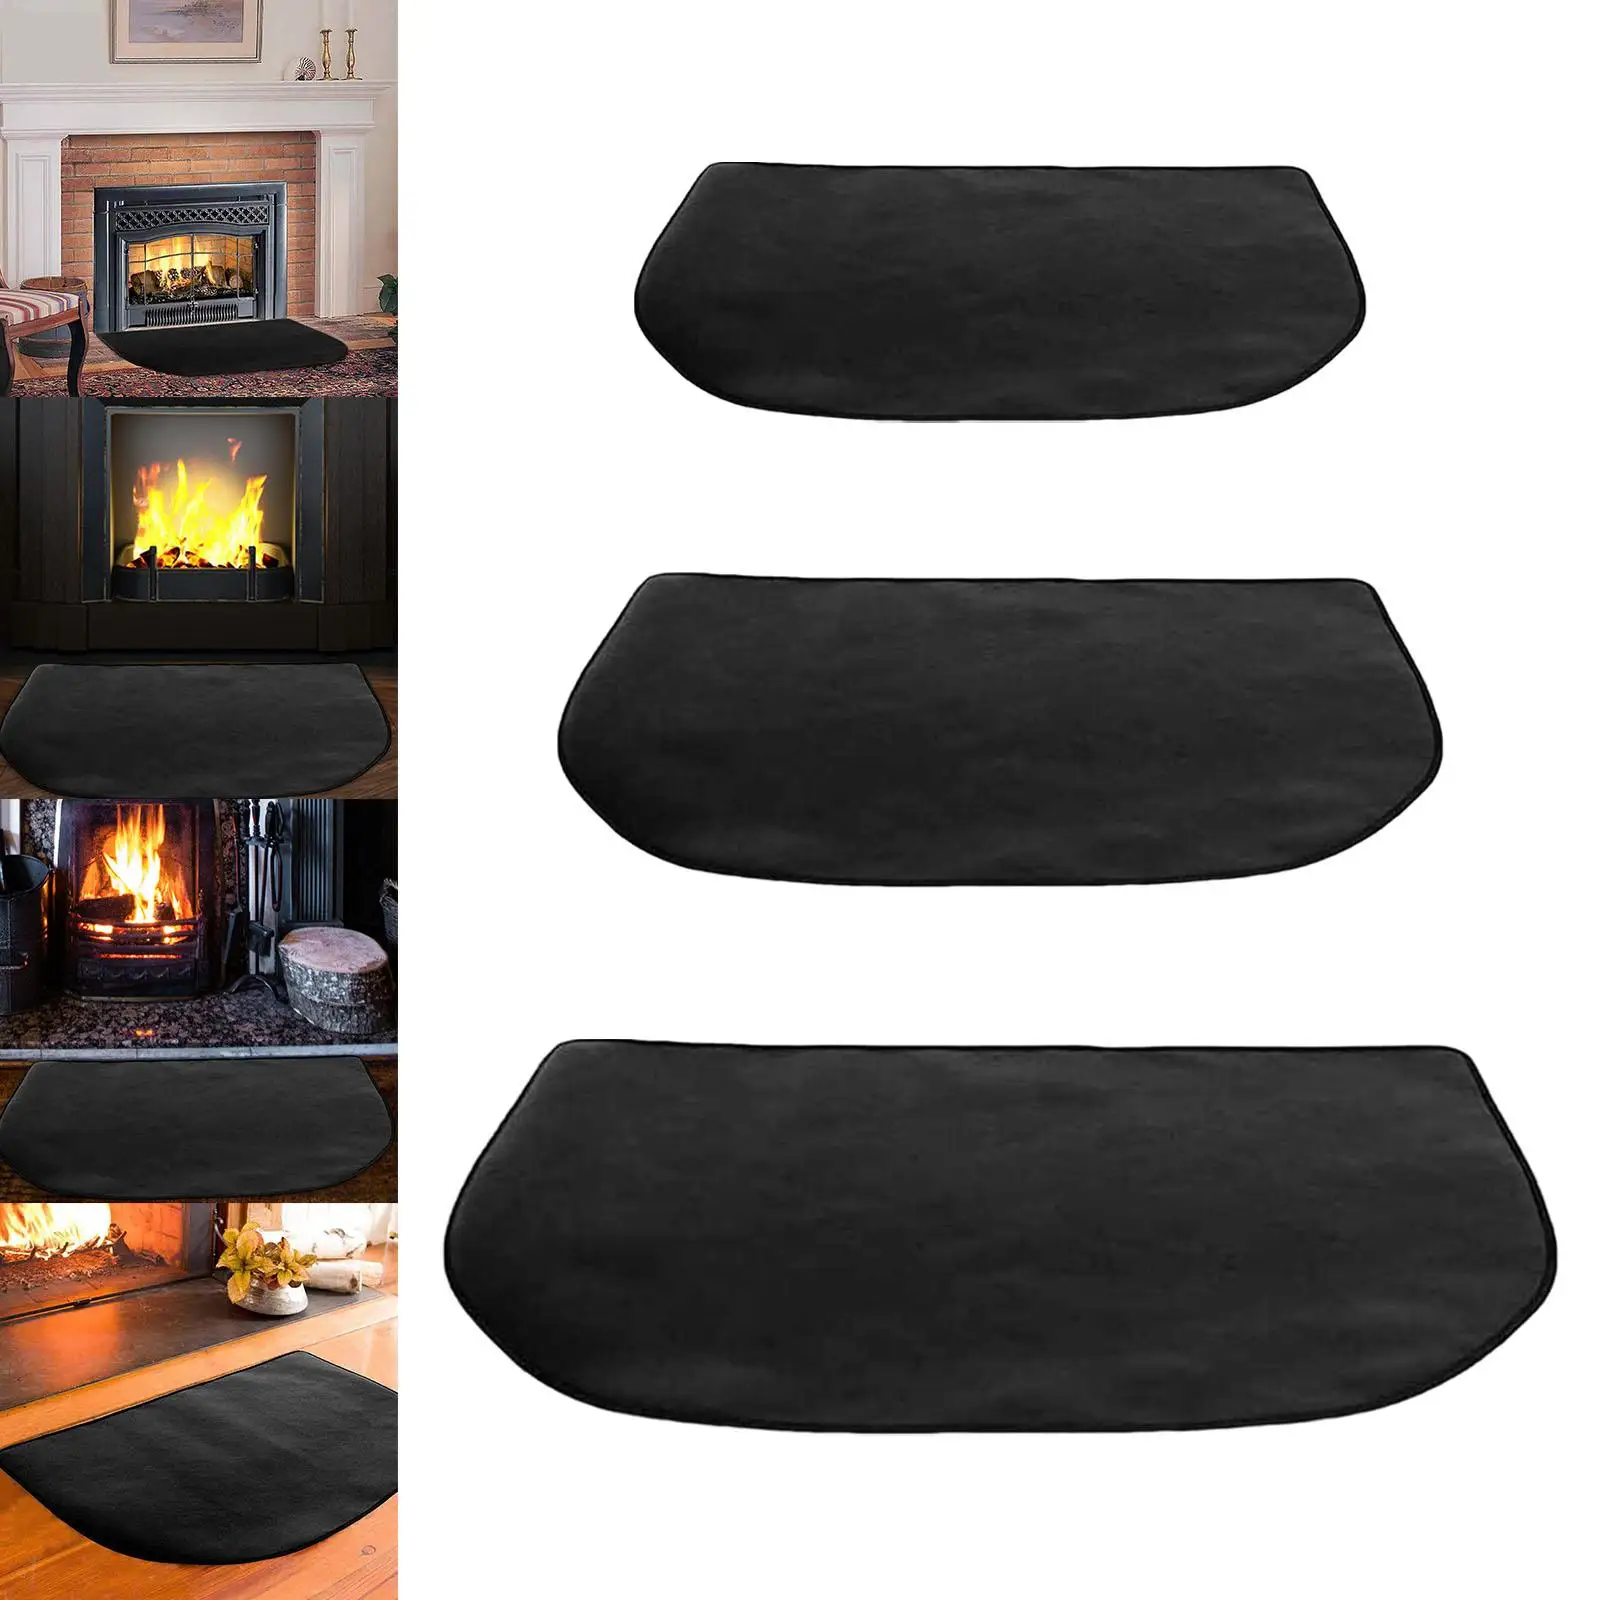 Fireproof Mat Black Protective Pad Heat for Fireplaces Camping Grill